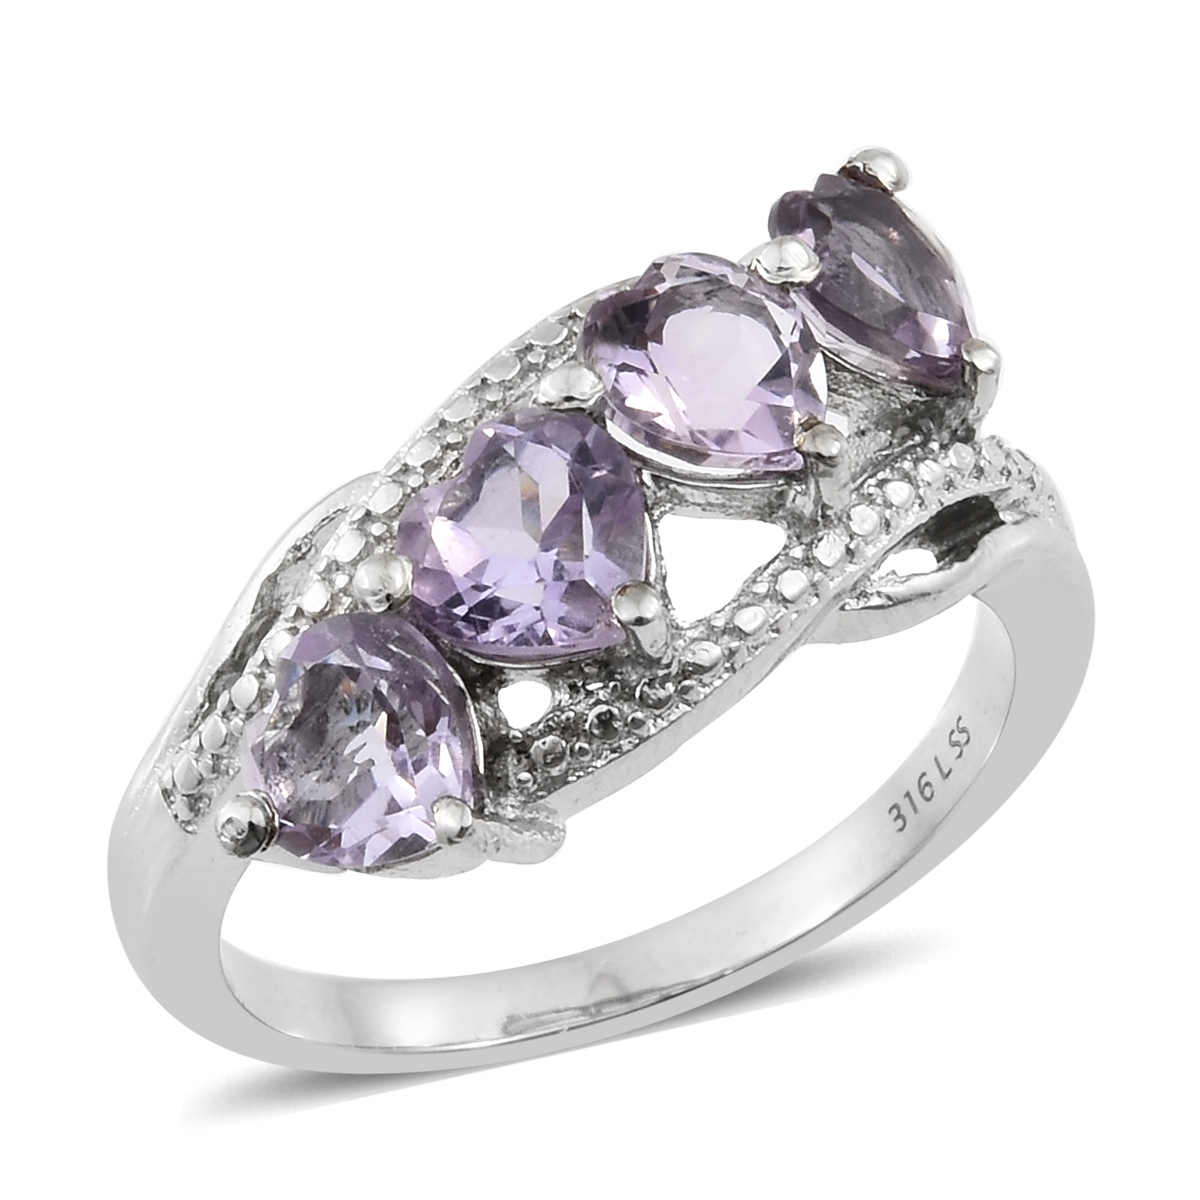 Rose De France Amethyst Stainless Steel 4 Heart Ring TGW 2.80 cts. - Houzz of DVA Boutique